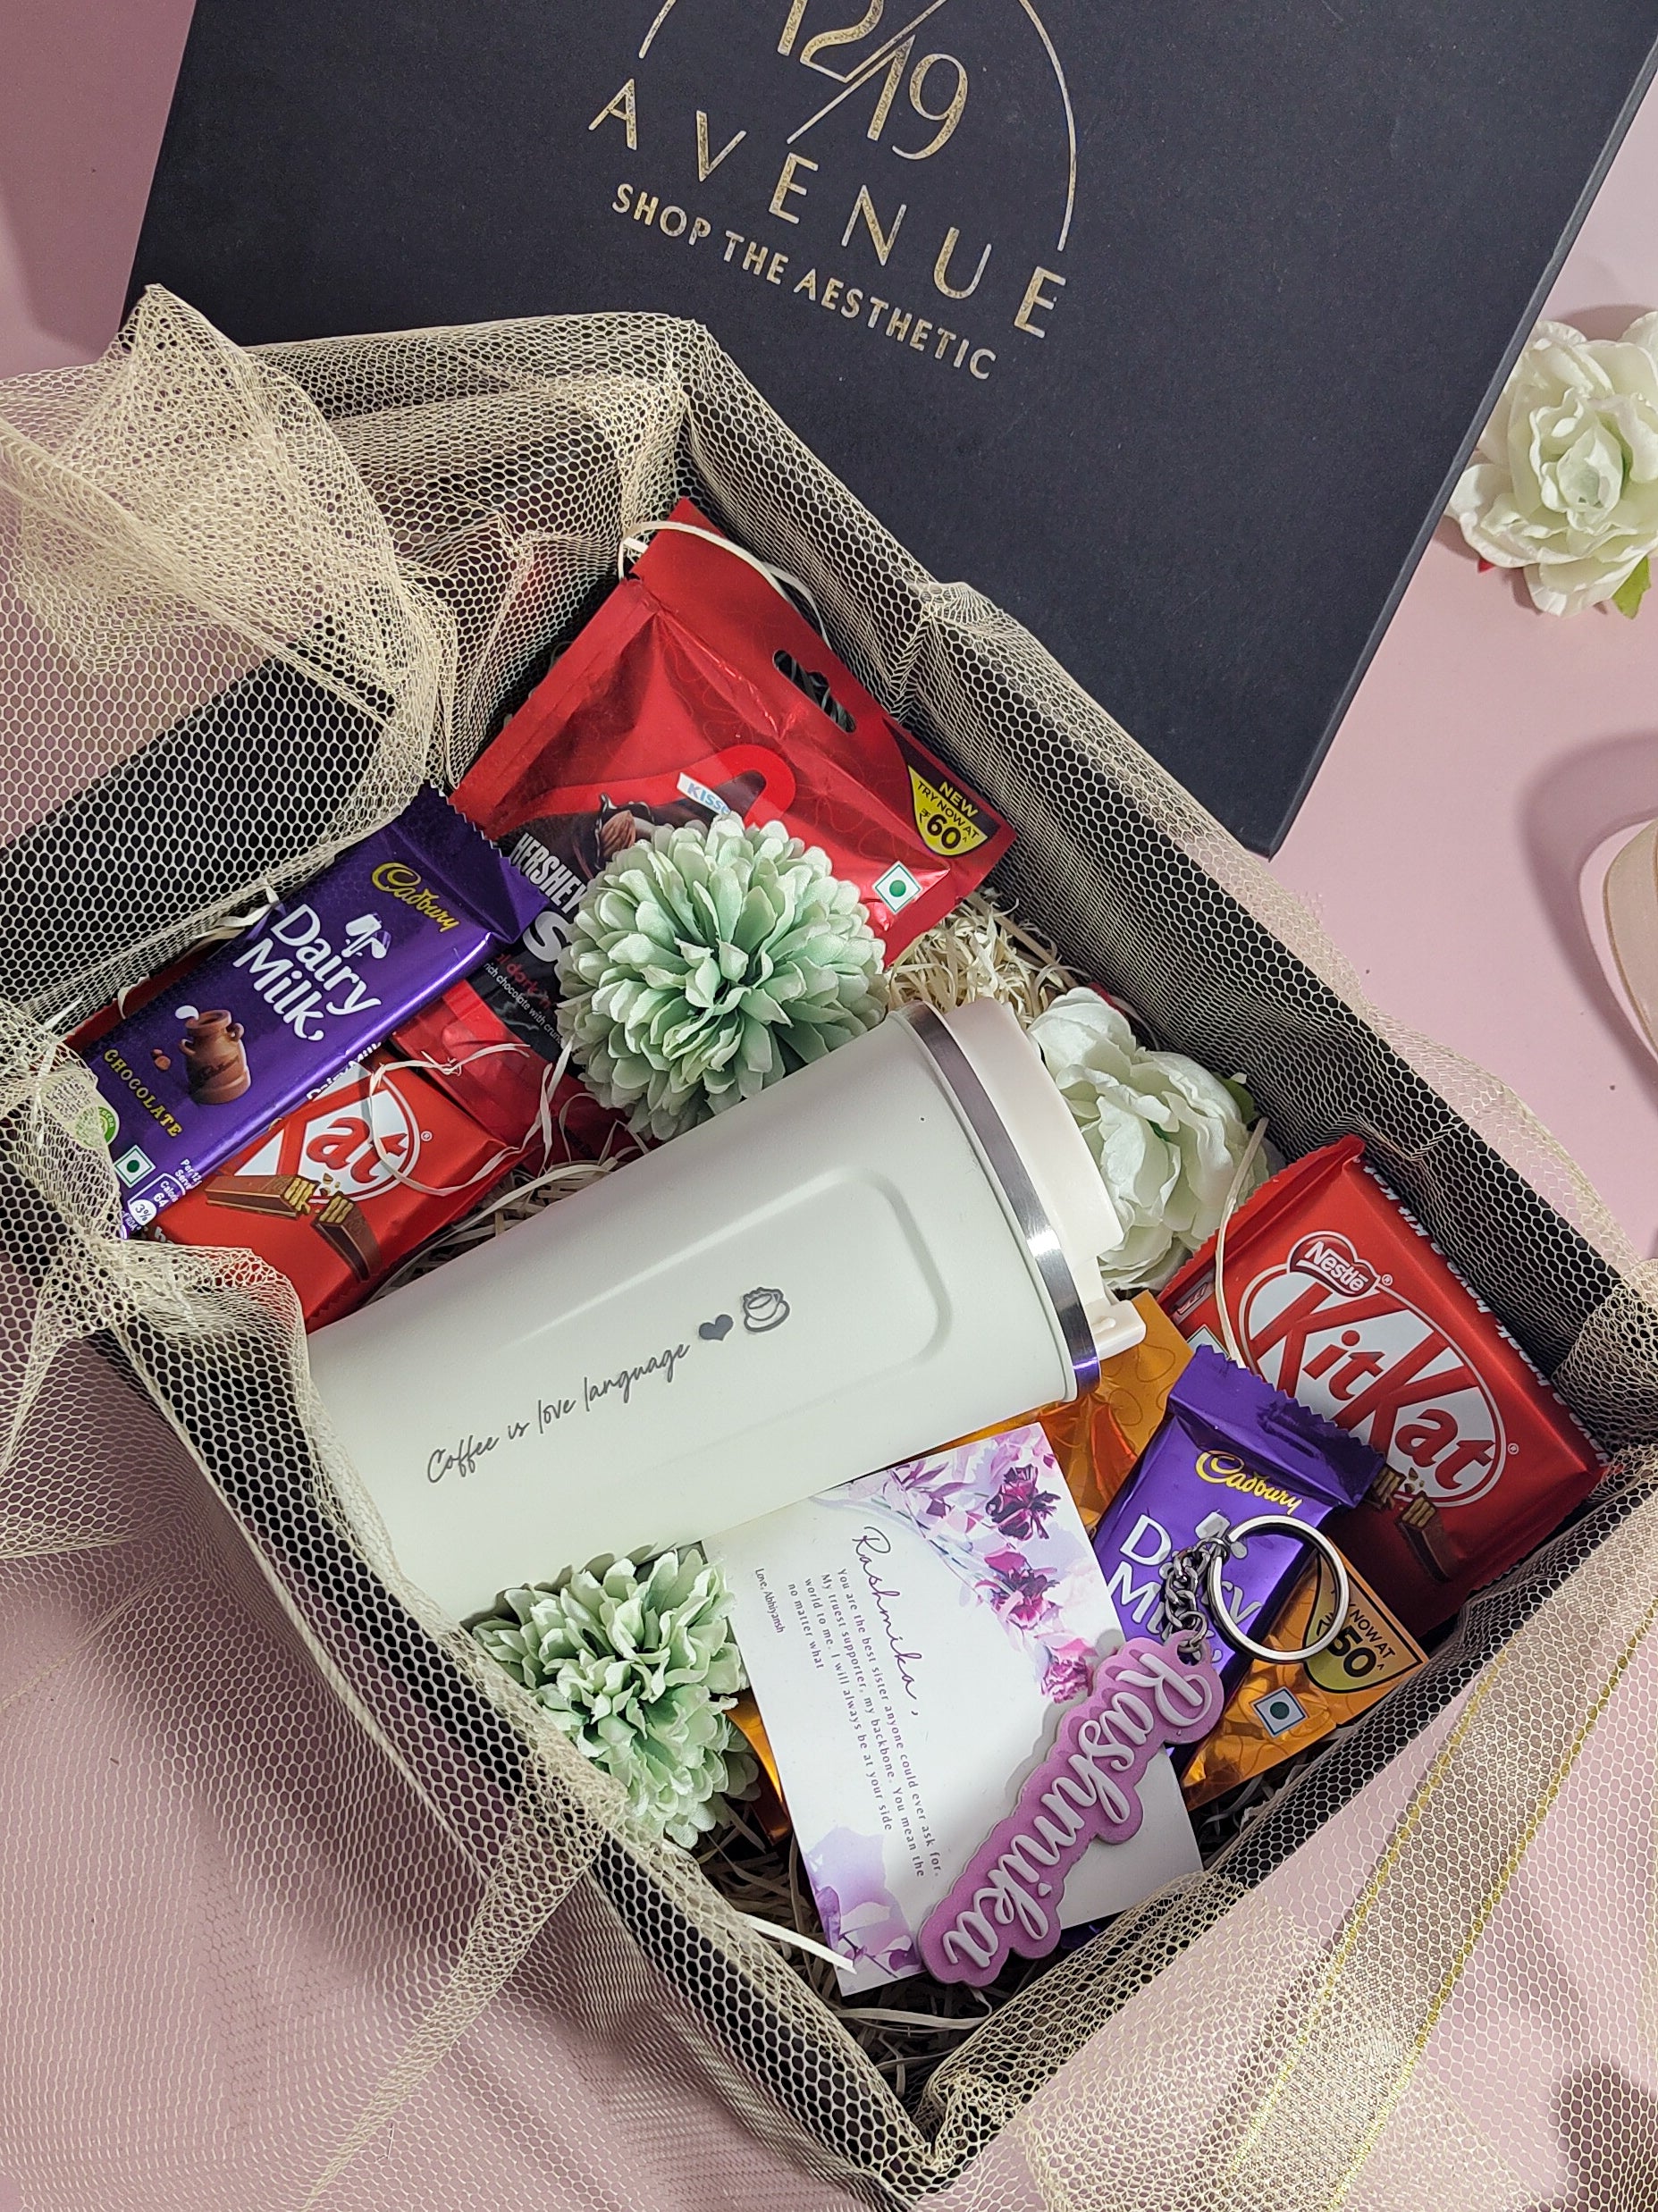 The Sweet Tooth Personalized Gifting Hamper – 1219 Avenue India